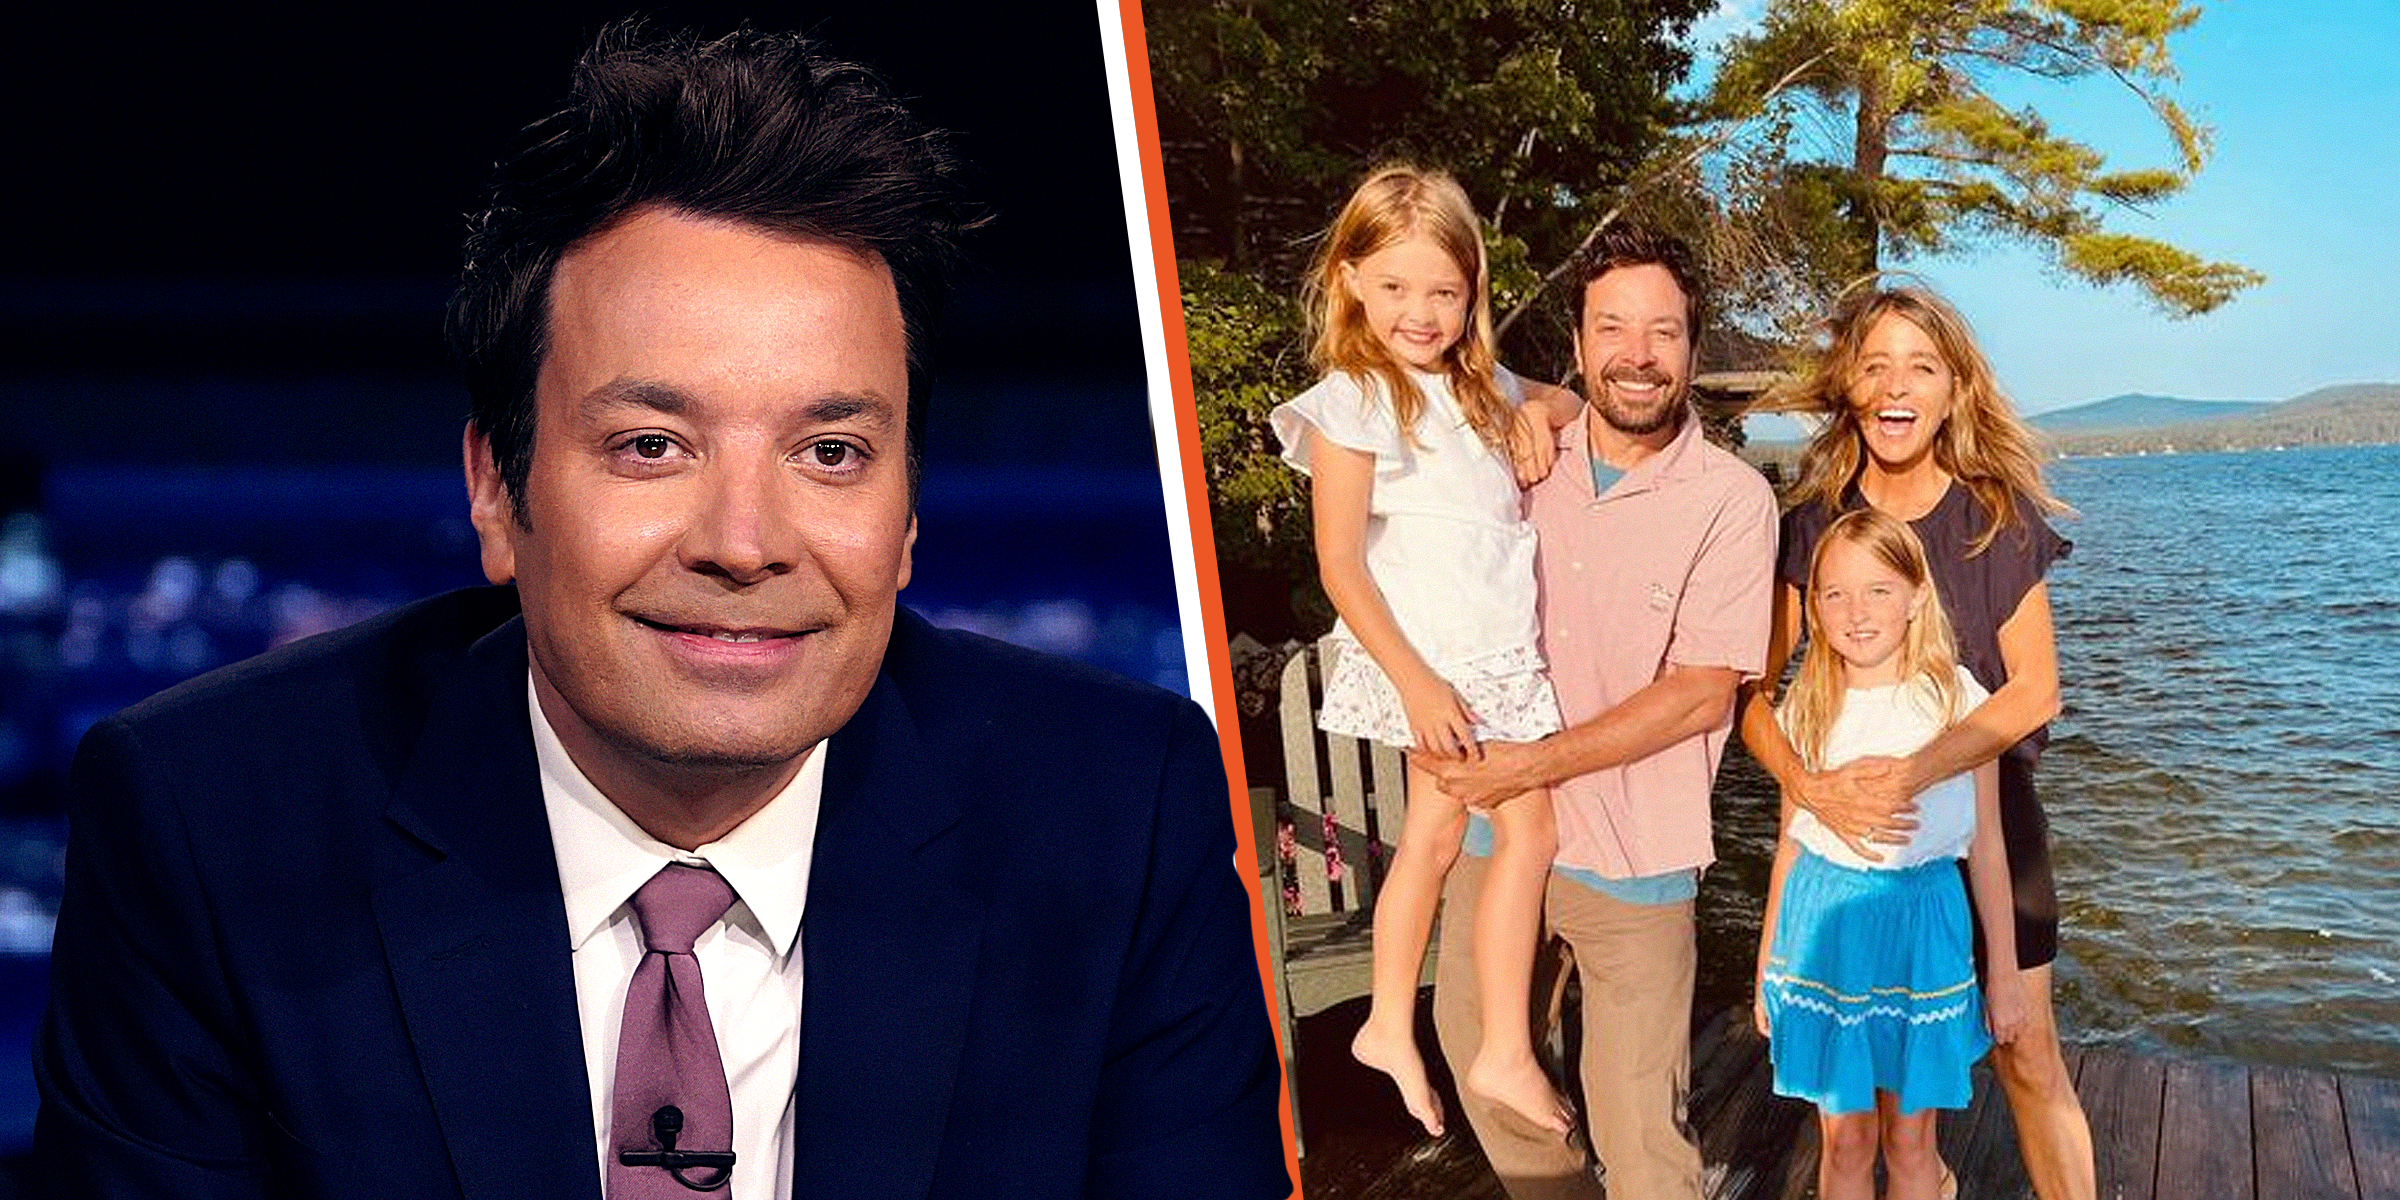 Jimmy Fallon | Jimmy Fallon, His Wife and Their Children | Source: Getty Images | instagram.com/jimmyfallon